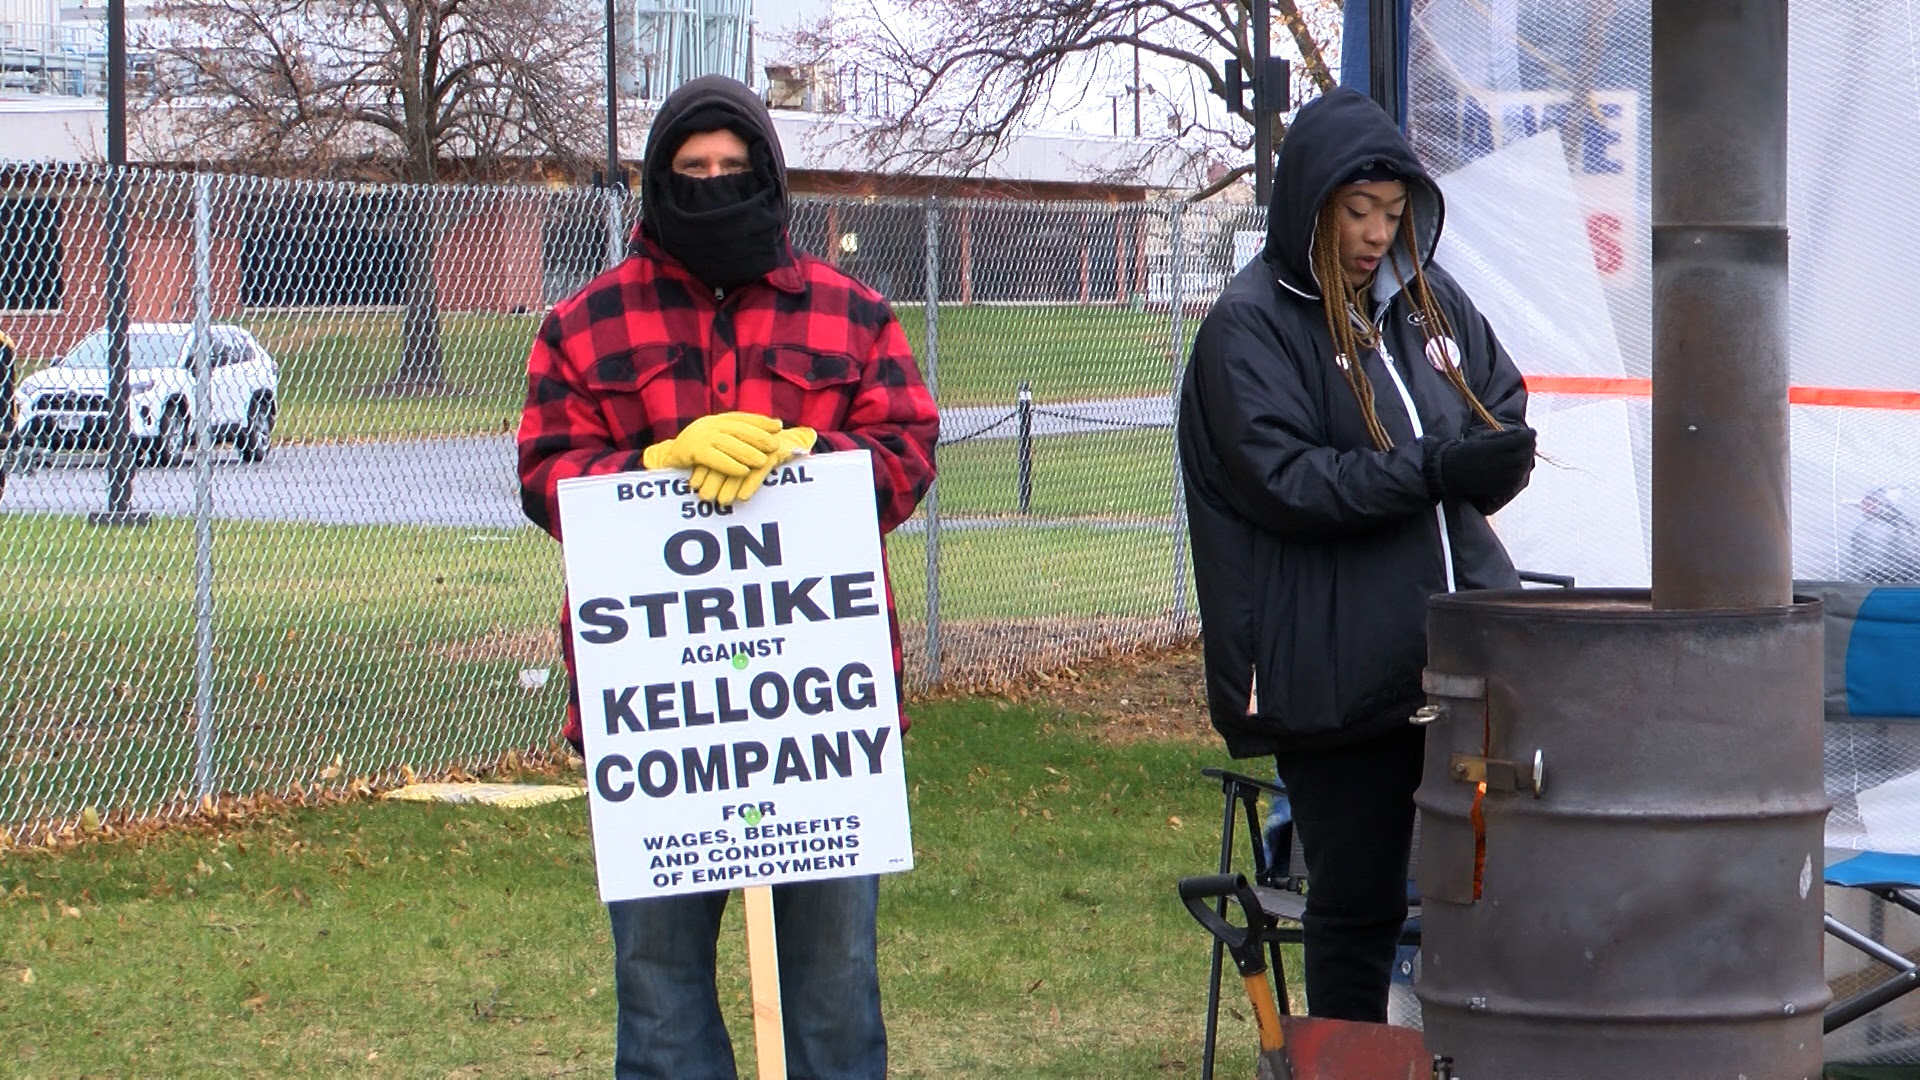 BCTGM union members are still holding the line at the Kellogg's plant in Omaha